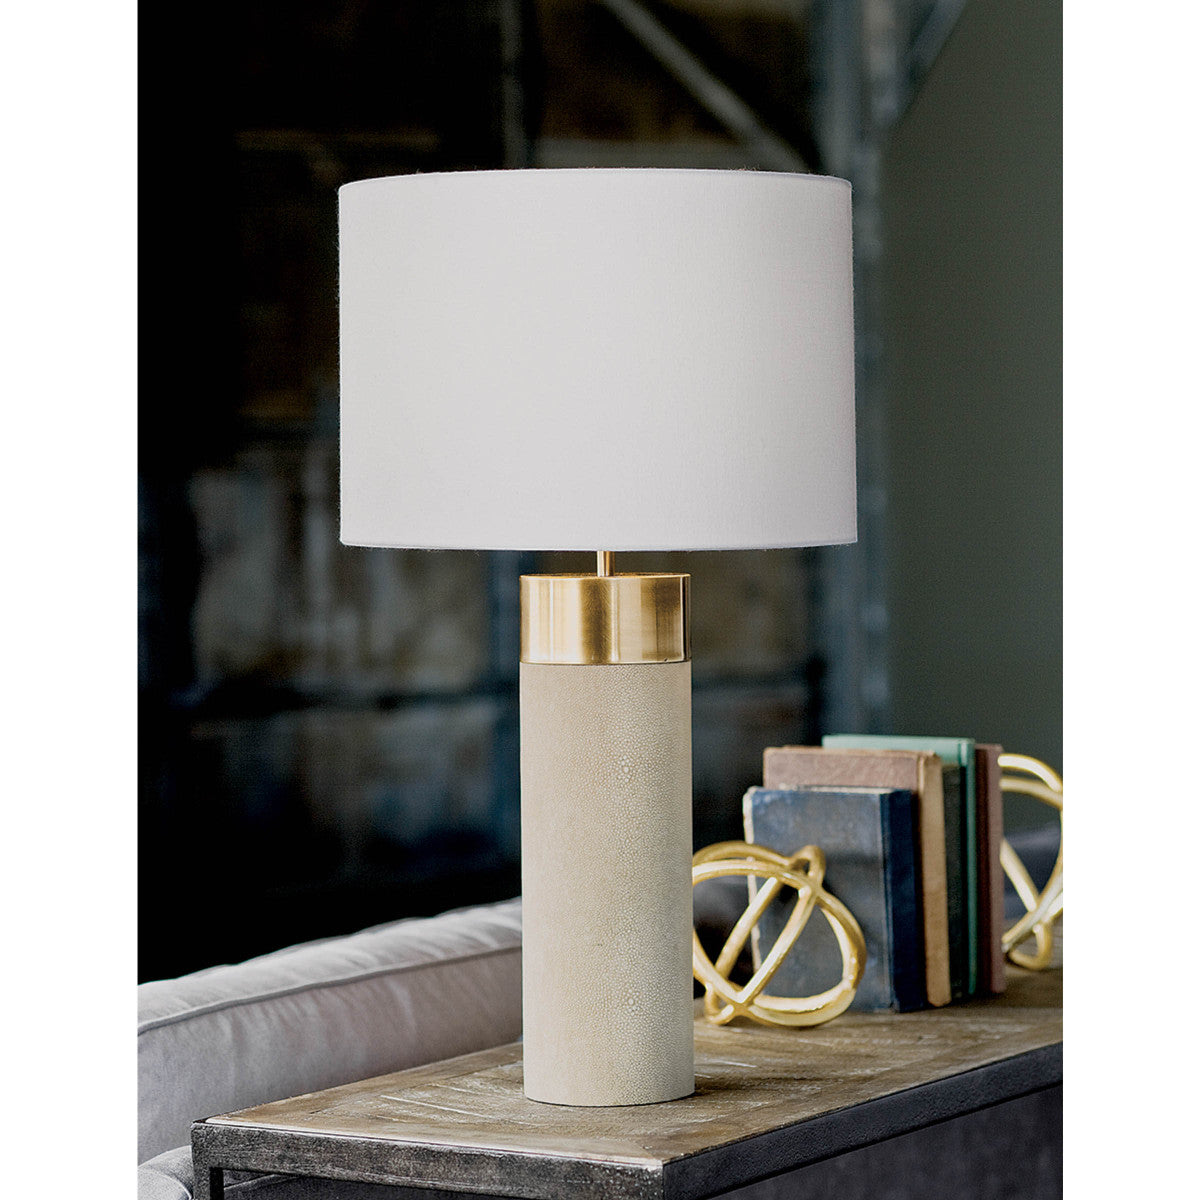 lamp shown as decor on console table